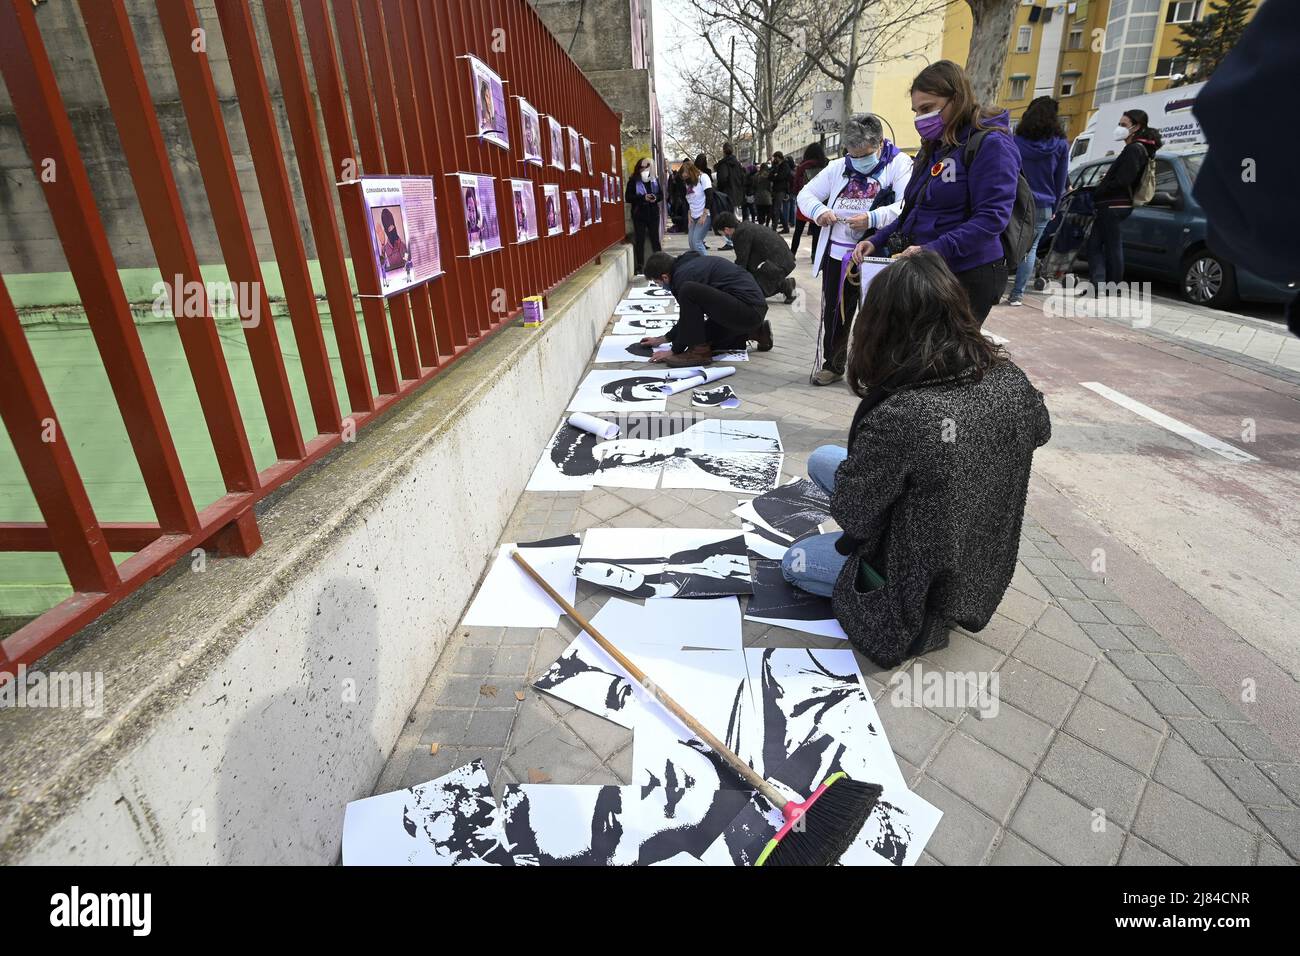 People gather to stage a protest after a feminist mural, depicting icons like Frida Kahlo, Rosa Parks and Nina Simone, vandalized by black spray paint ovenight in Madrid, Spain Featuring: Atmosphere Where: Madrid, Spain When: 08 Mar 2021 Credit: Oscar Gonzalez/WENN Stock Photo